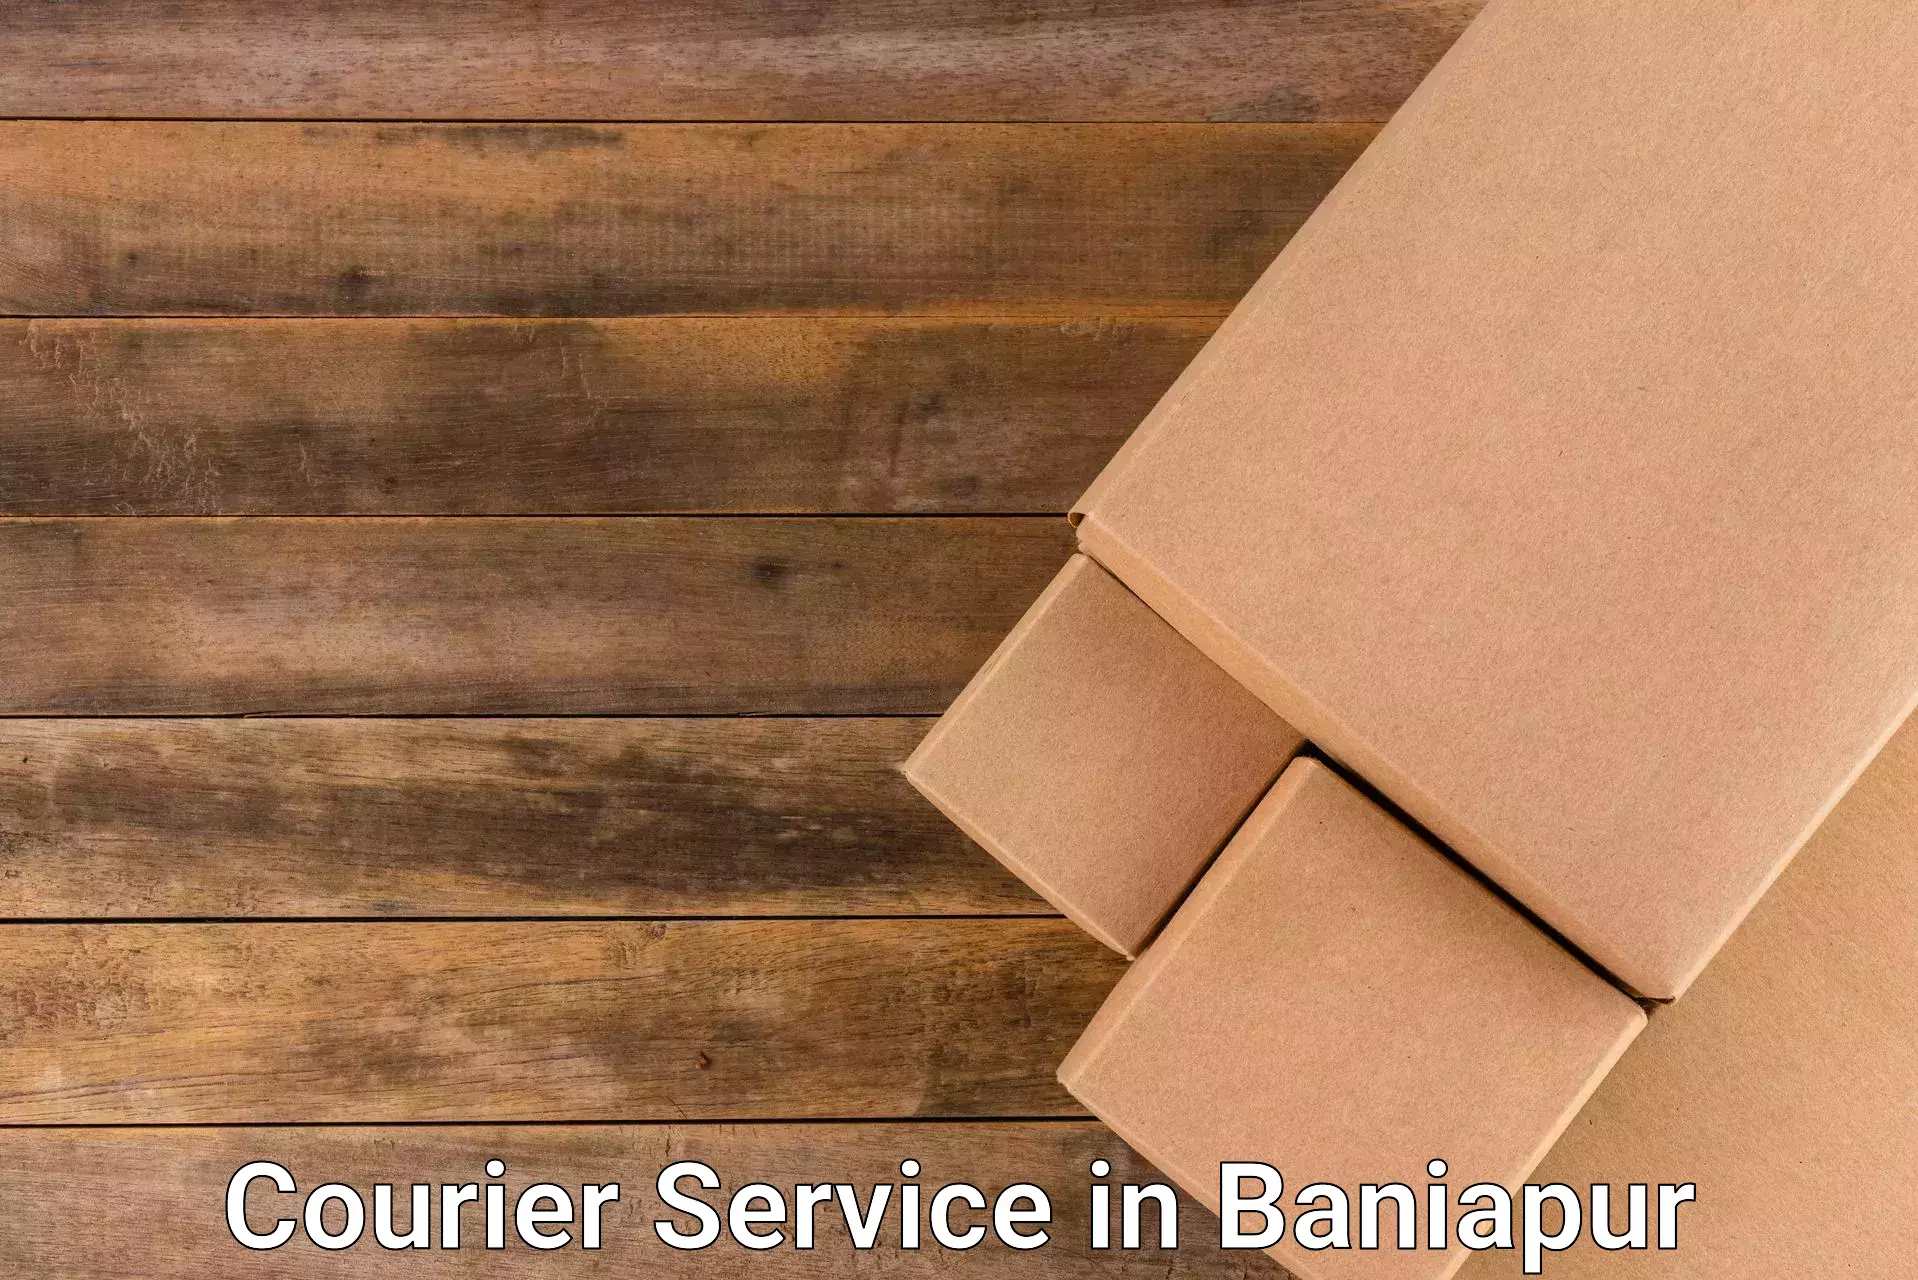 Same-day delivery options in Baniapur